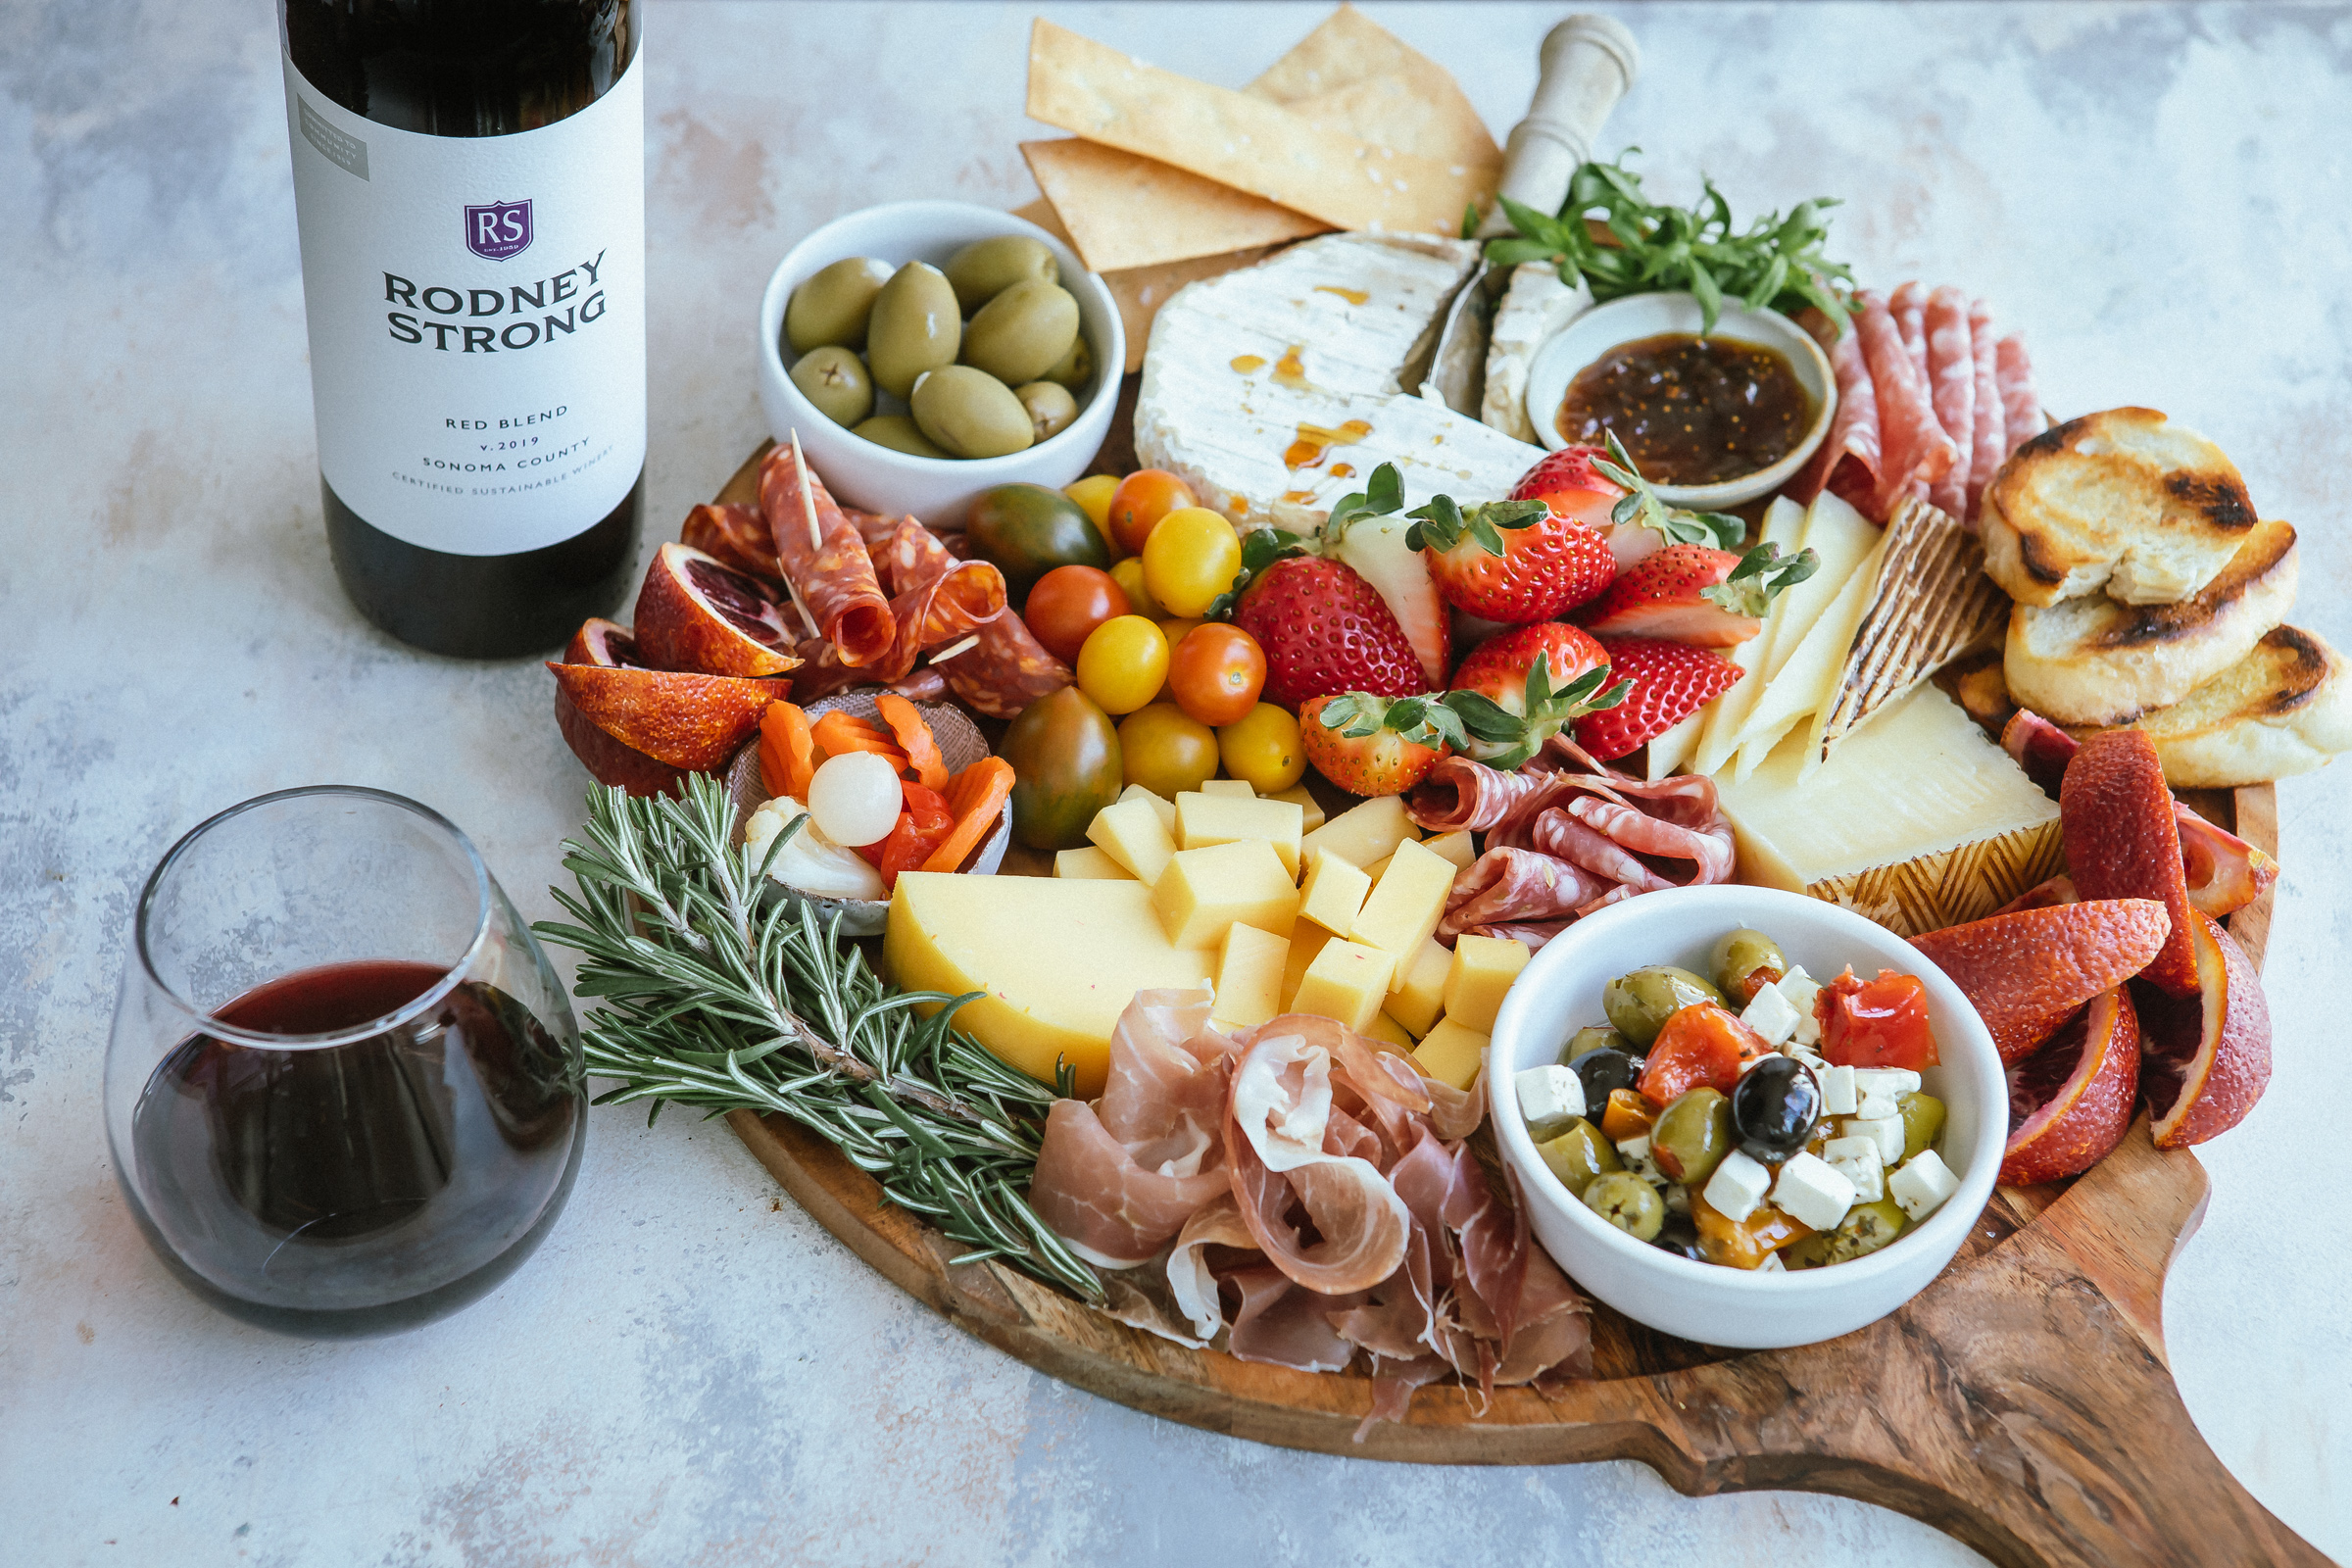 Charcuterie board with RS Red blend